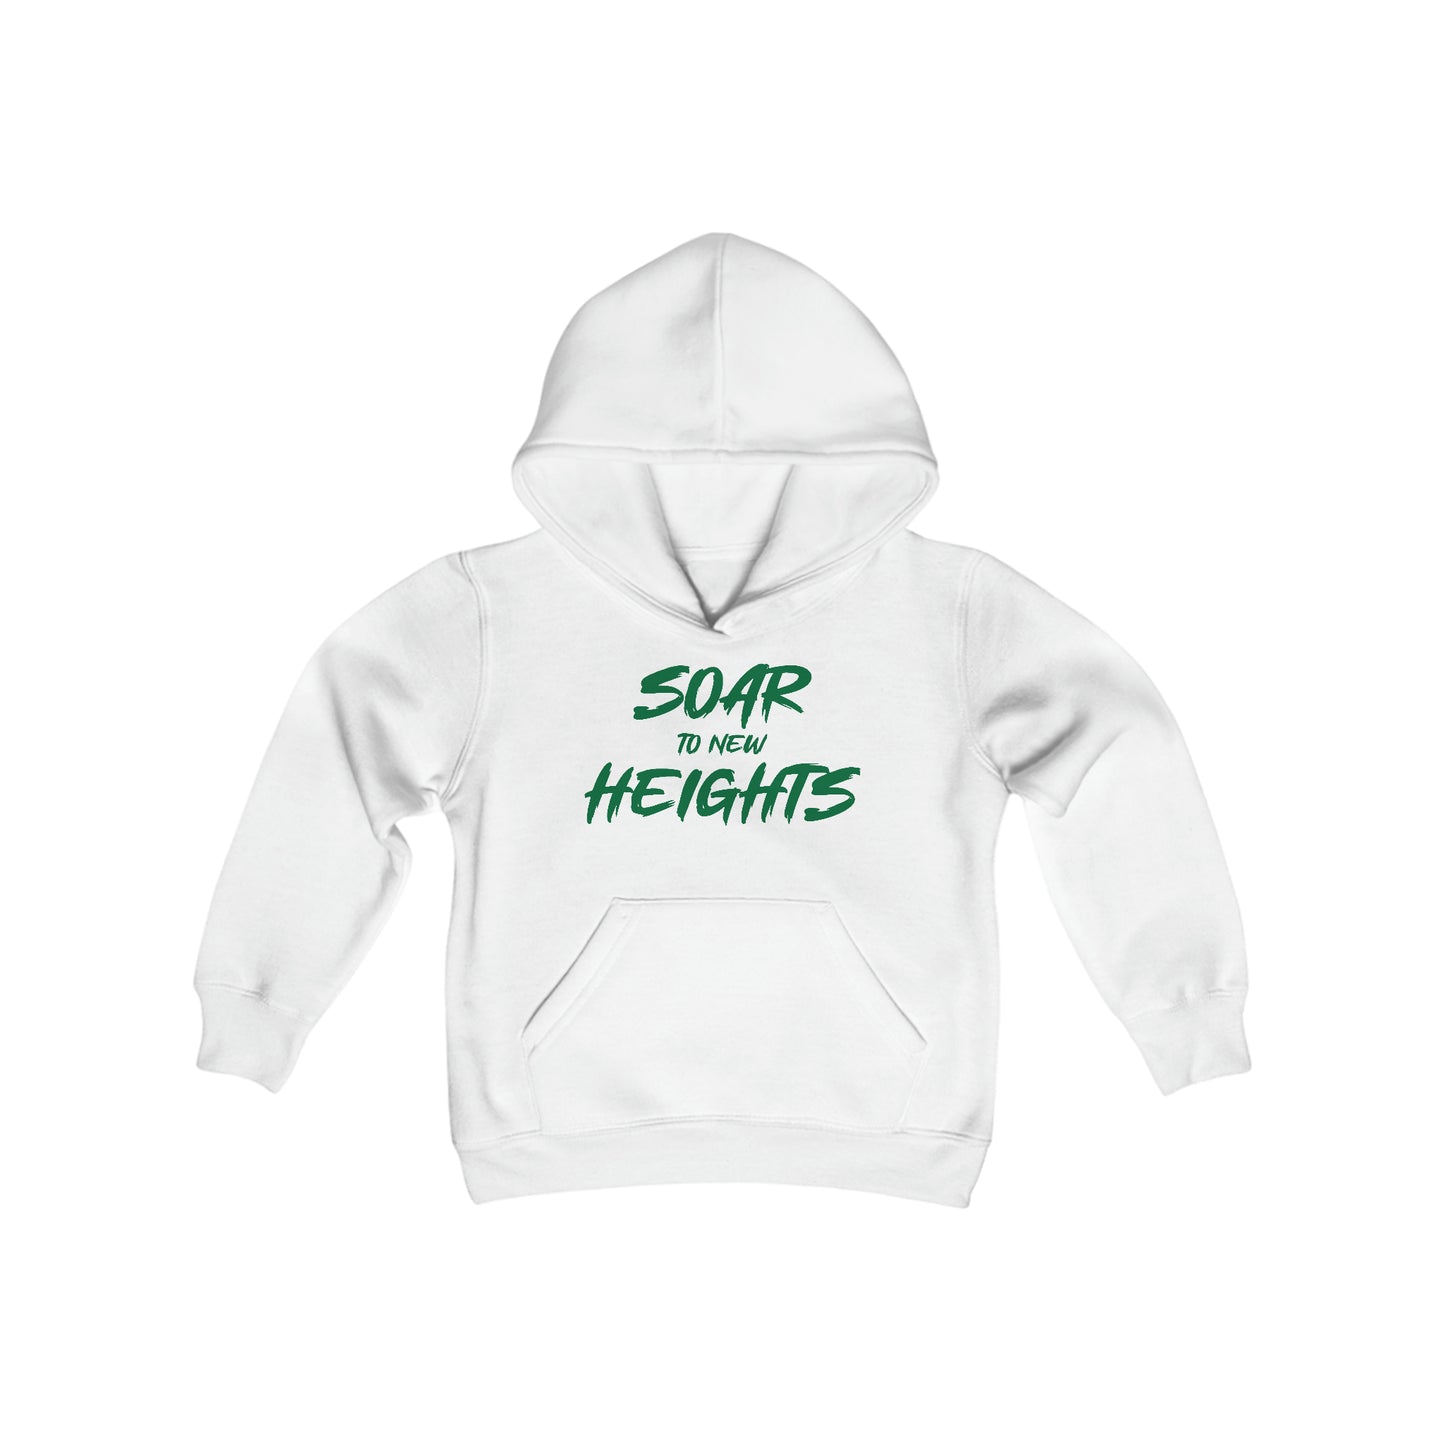 Soar To New Heights Hoodie - Youth